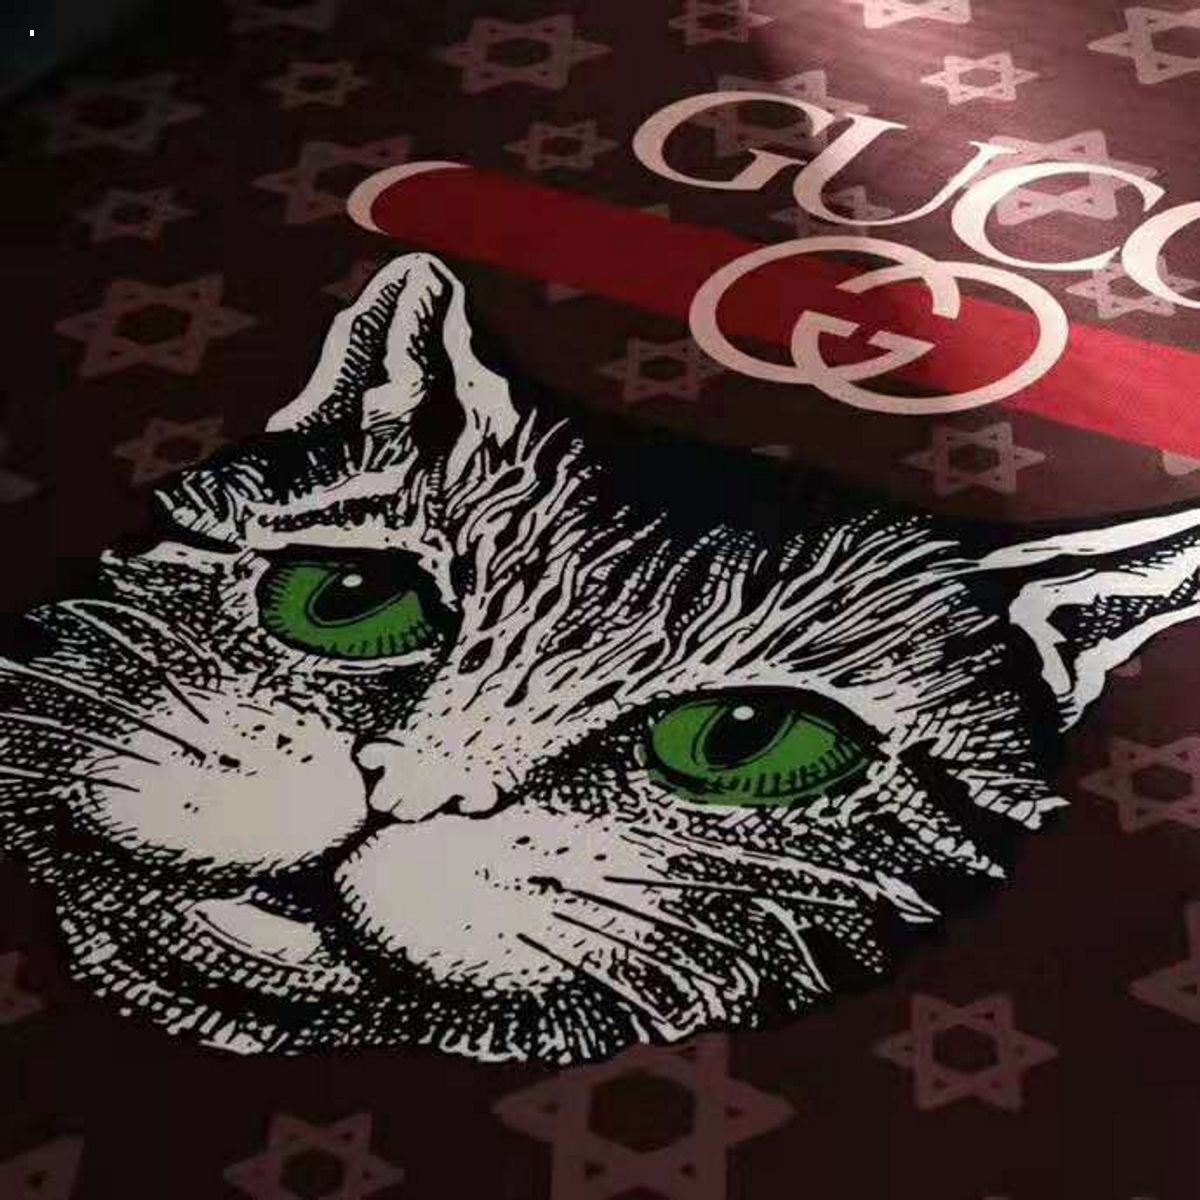 Gucci Cat Mix Red Color Luxury Brand Carpet Rug Limited Edition